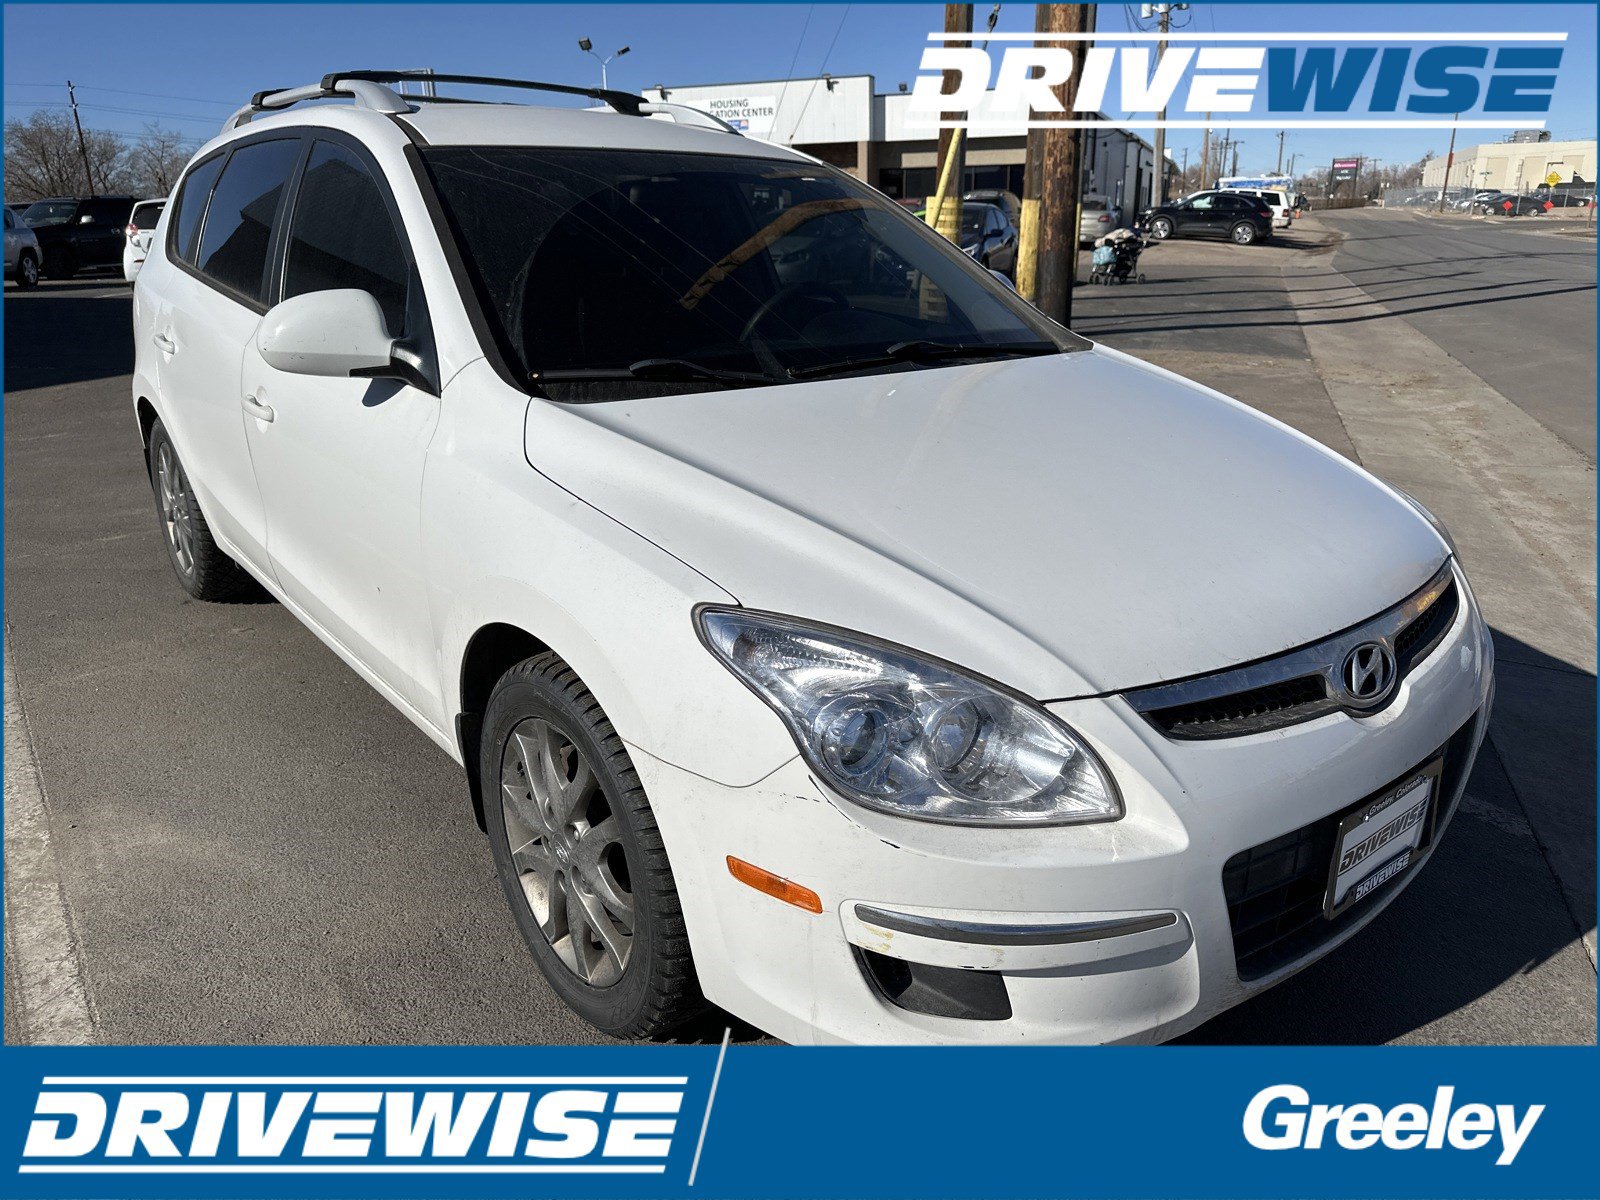 Pre-Owned 2012 Hyundai Elantra Touring GLS Station Wagon in Greeley #DW2822  | DriveWise